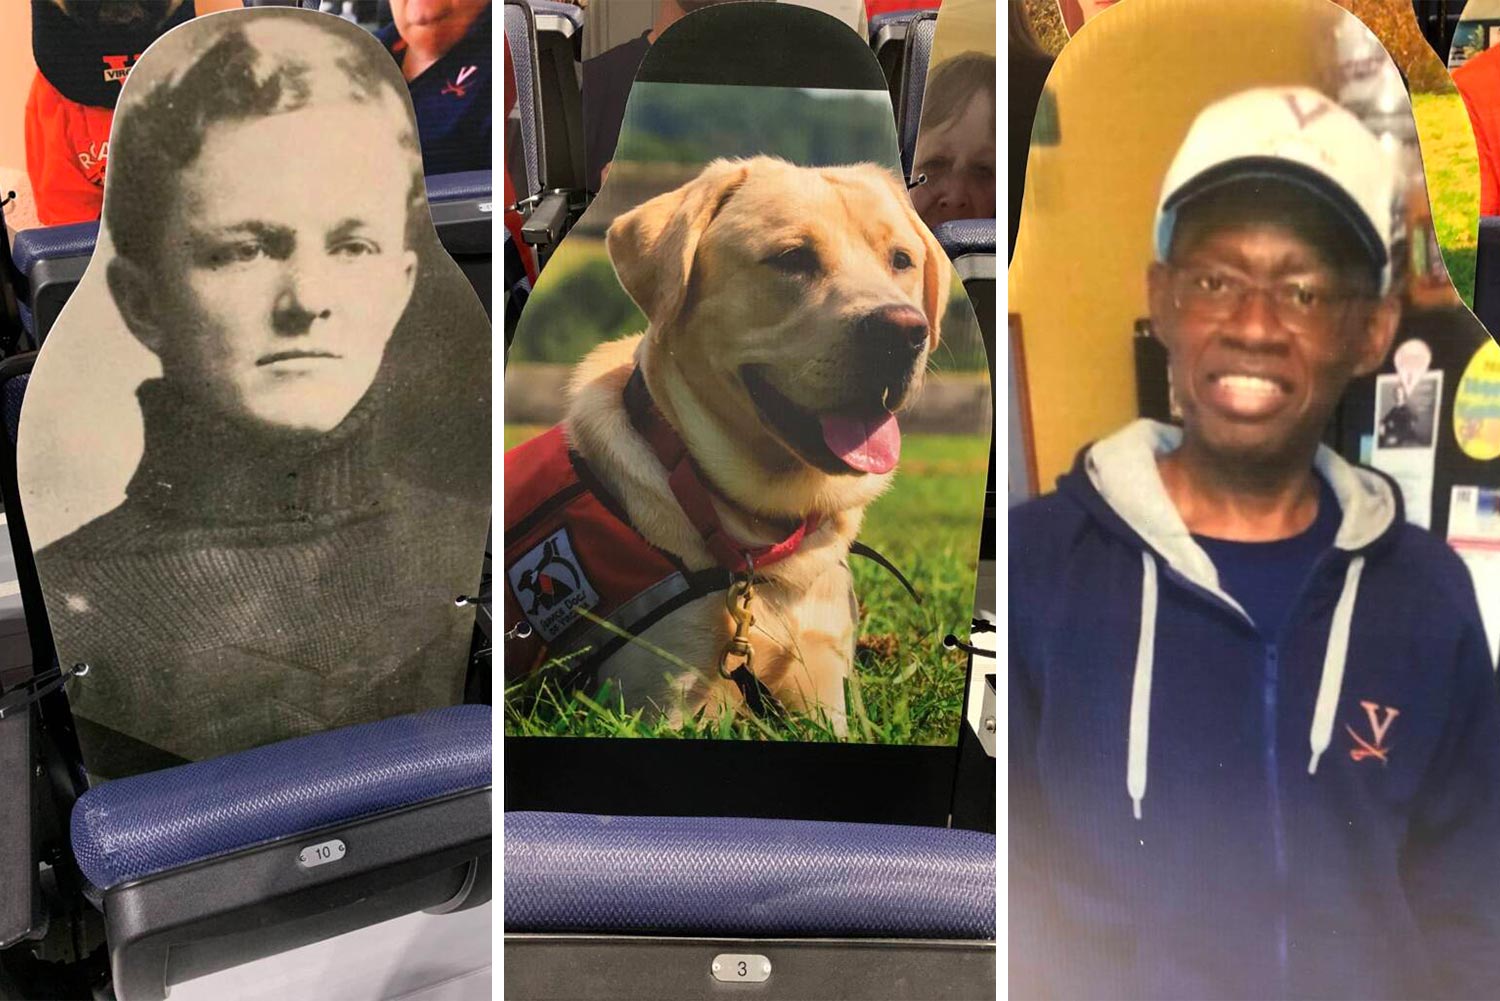 cutout headshots: From left, William “King” Cole,service dog Beacon, and Ronald West